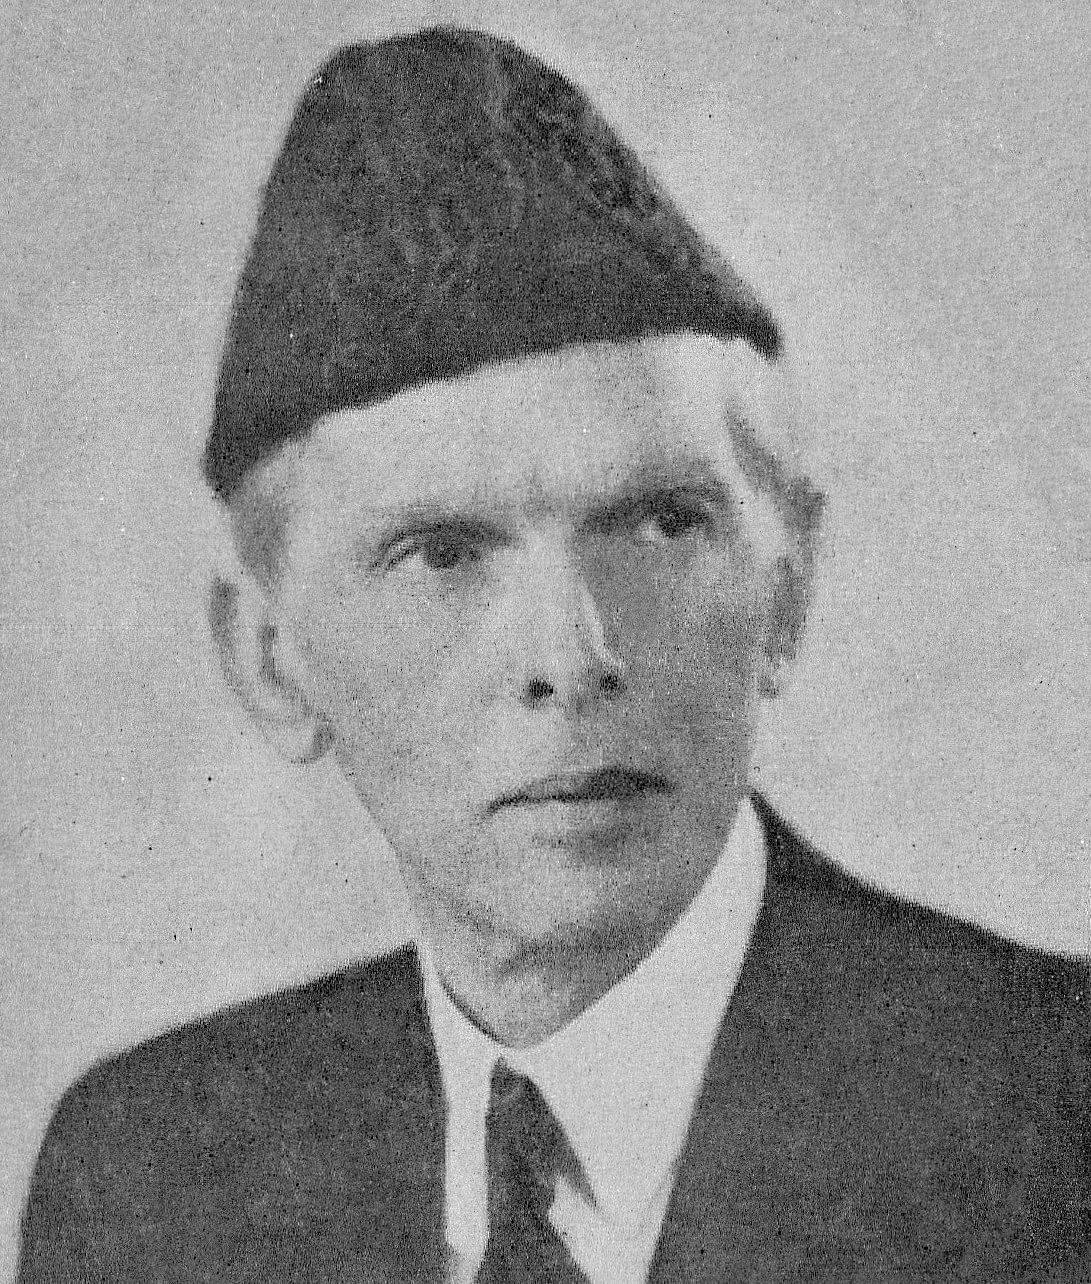 BJP Lok Sabha member Savitirbai Phule Muhammad Ali Jinnah's pictures should be put up at all those places where there were pictures of other freedom fighters.